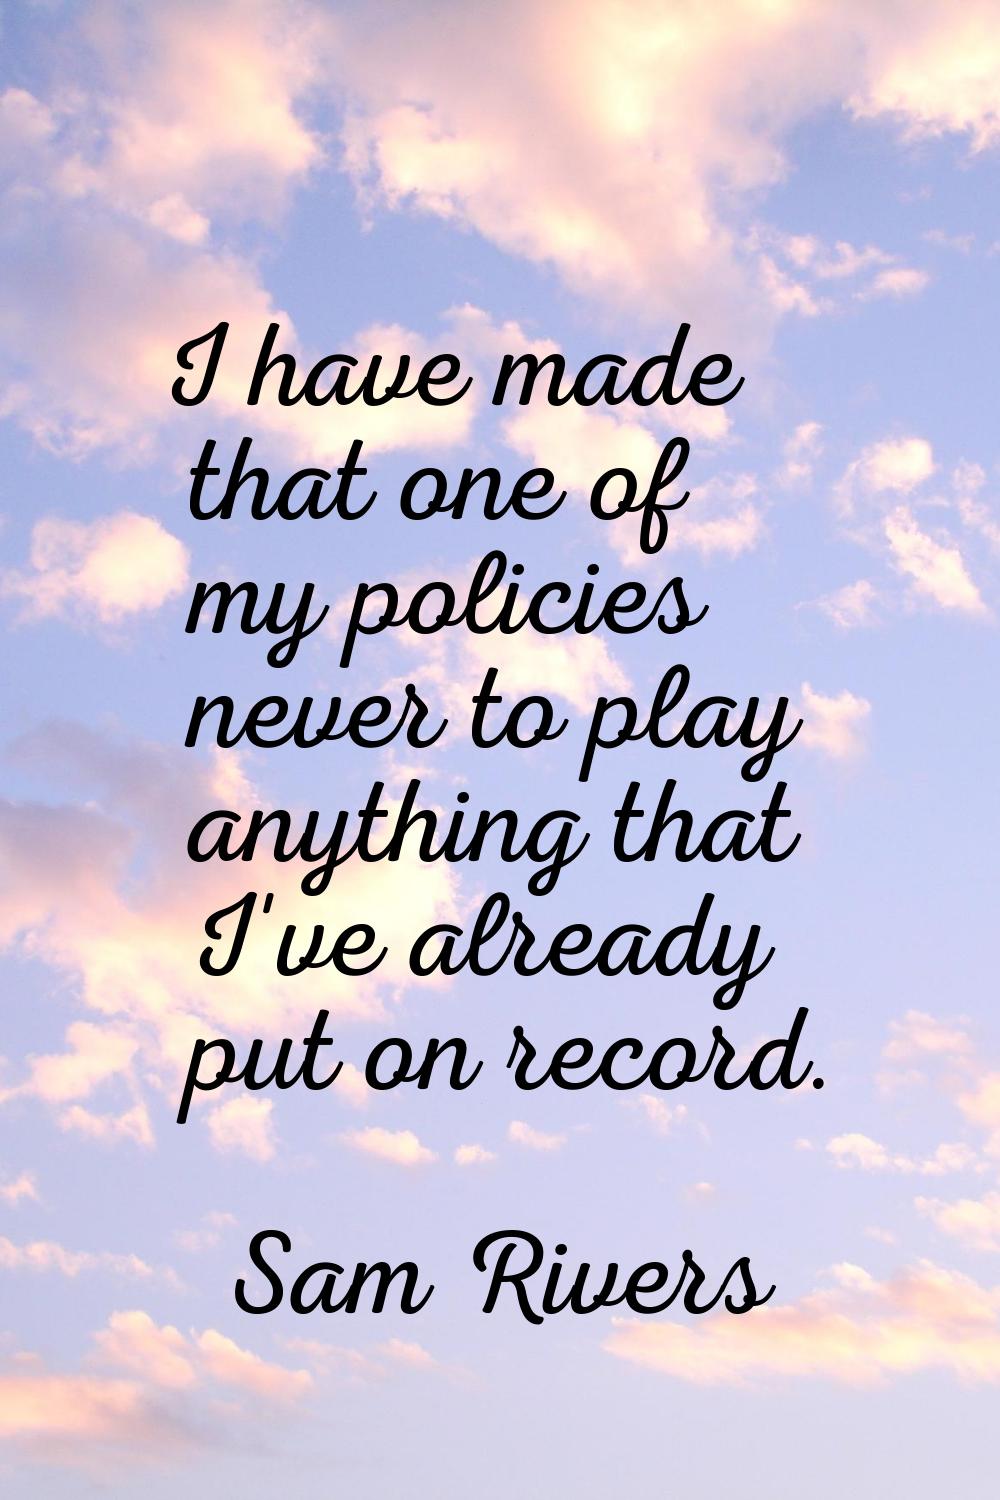 I have made that one of my policies never to play anything that I've already put on record.